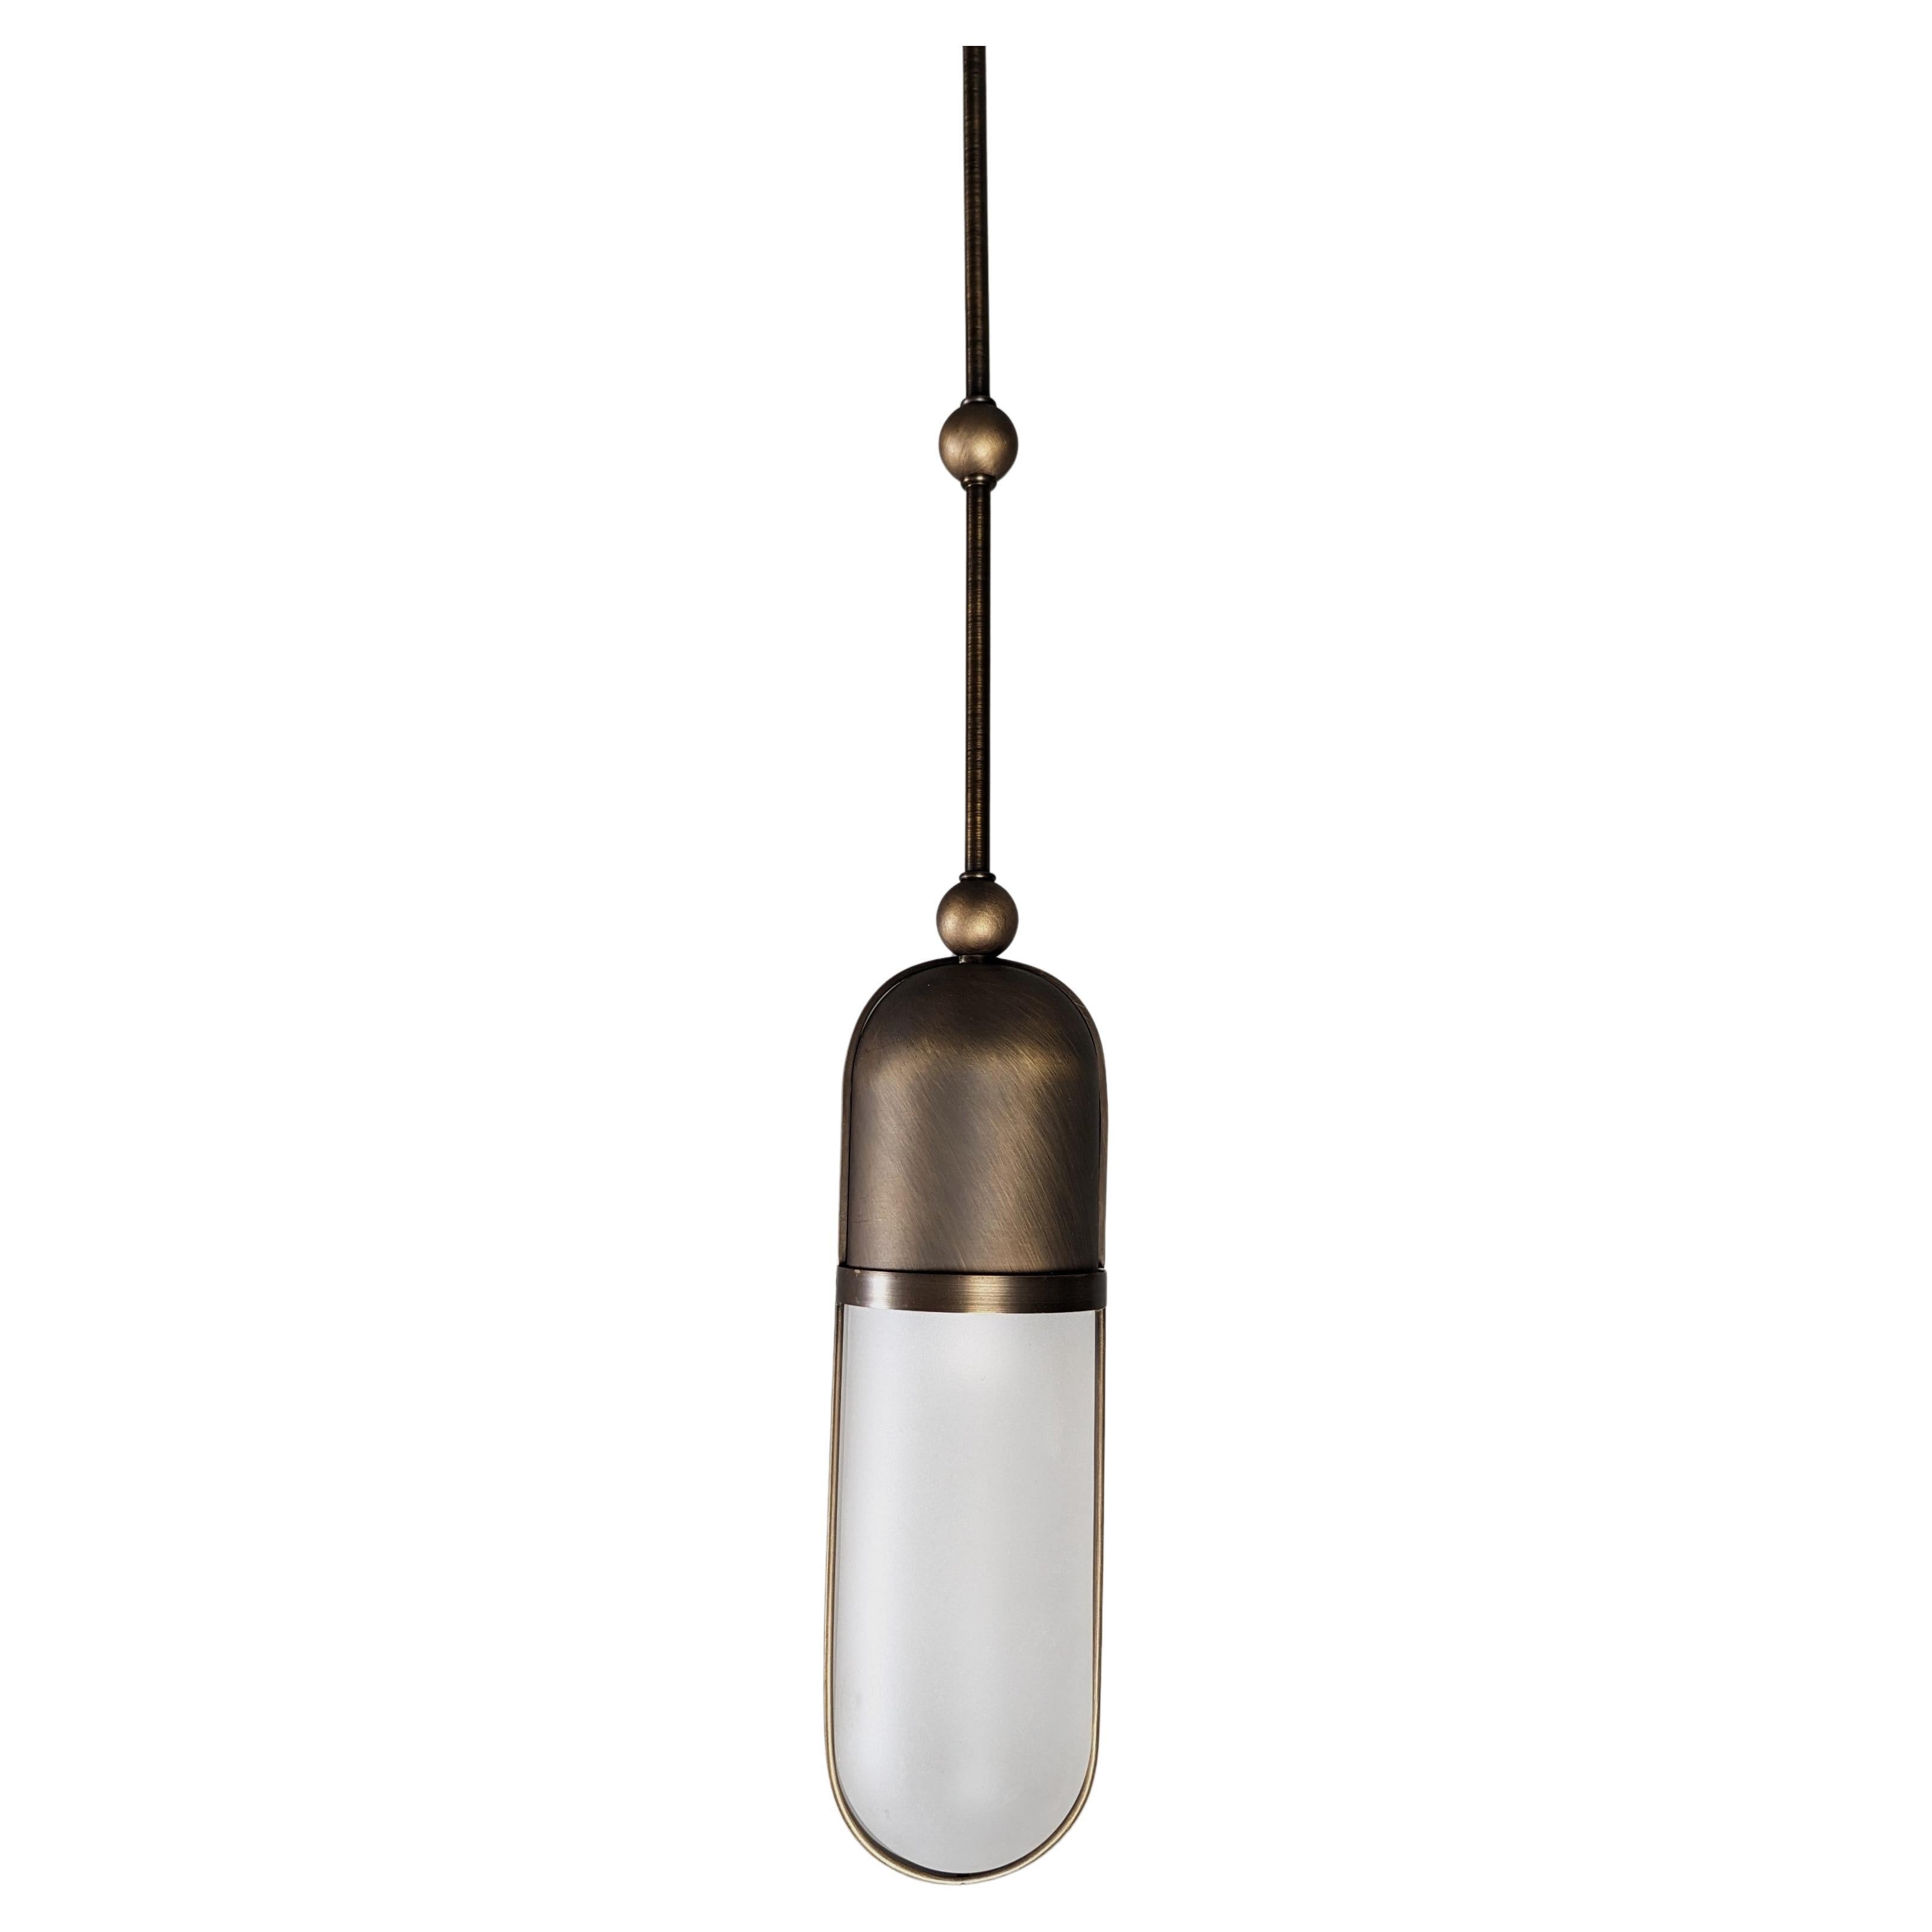 Imagin Deco Pendant in Antique Bronze, Antique brass and Frosted Glass For Sale